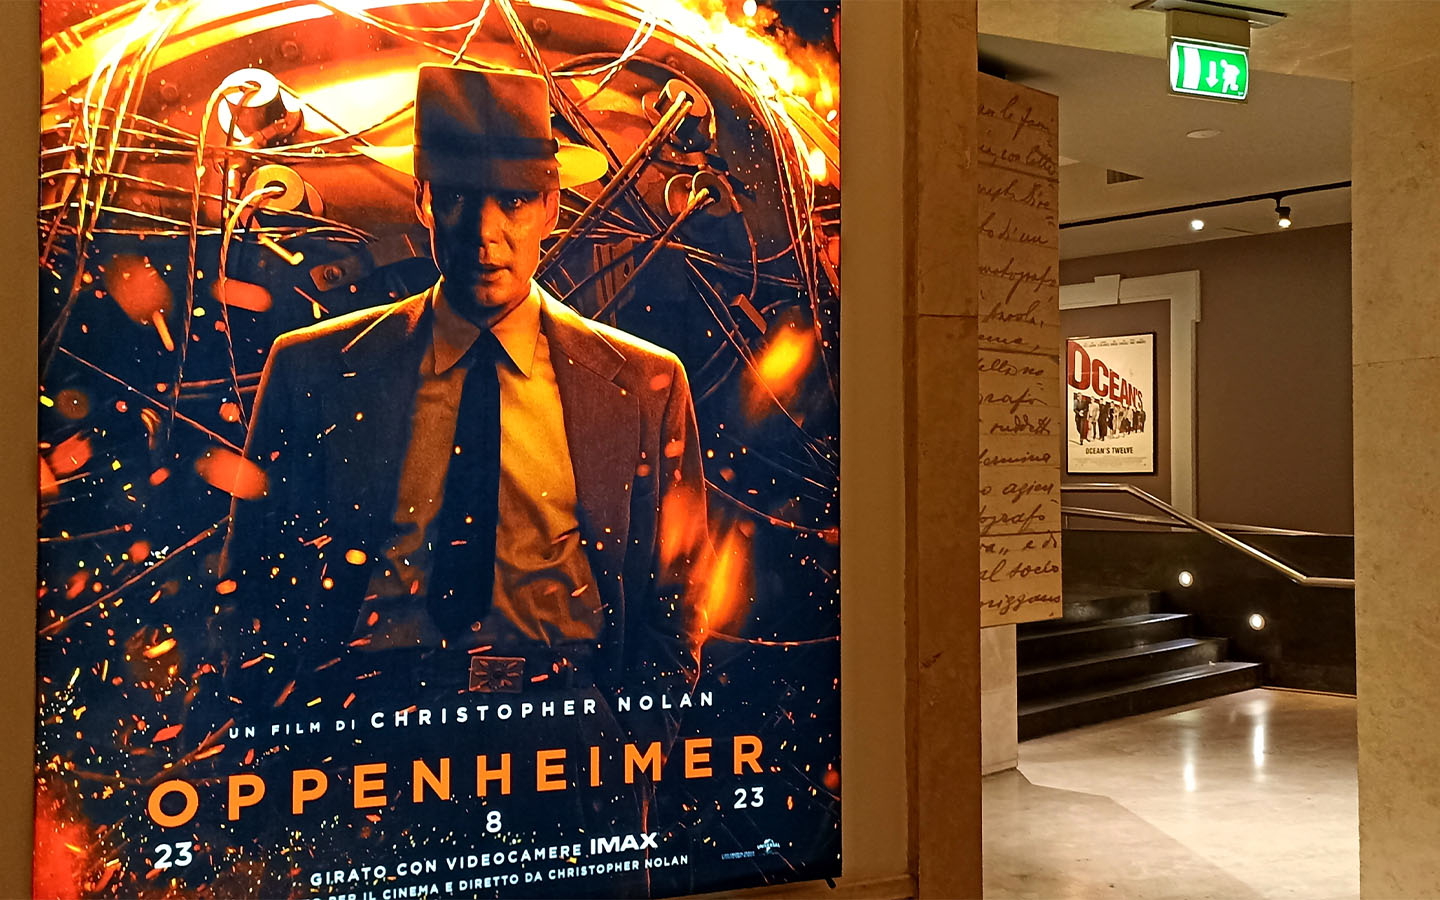 ‘Oppenheimer’ is the big winner at this year’s Oscars